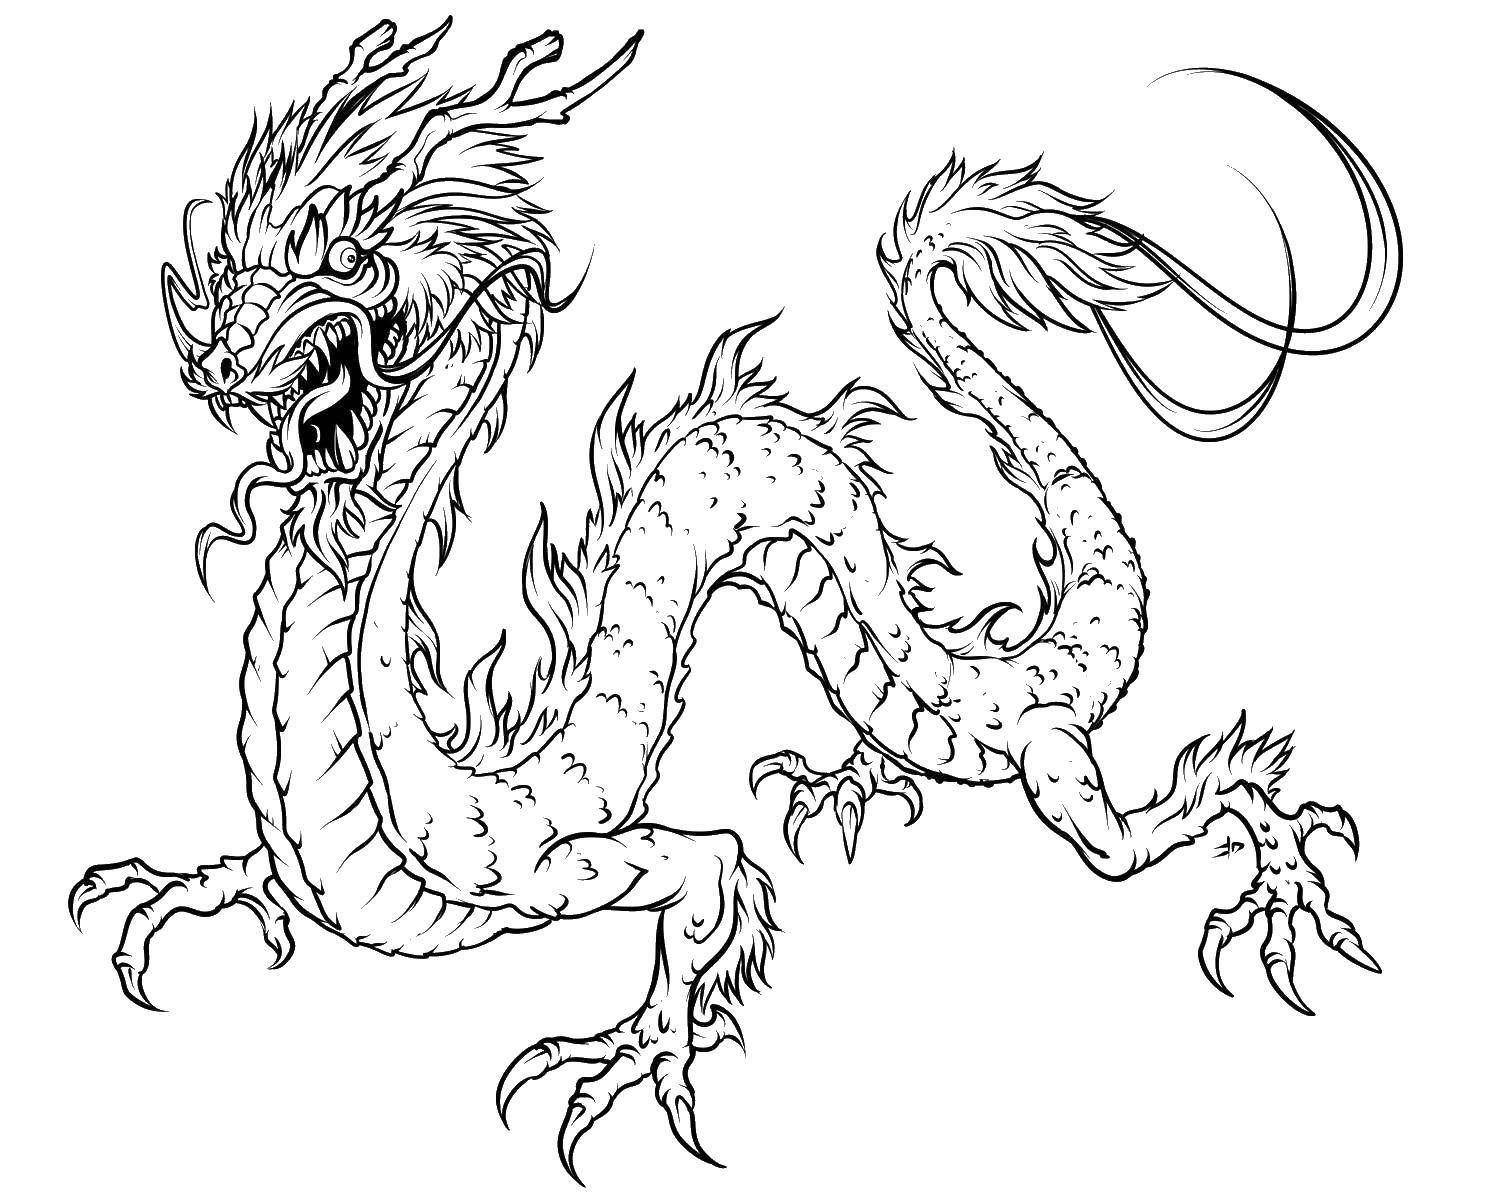 Online Coloring Pages Chinese, Coloring Page Chinese Dragon Dragons. - Free Printable Chinese Dragon Coloring Pages